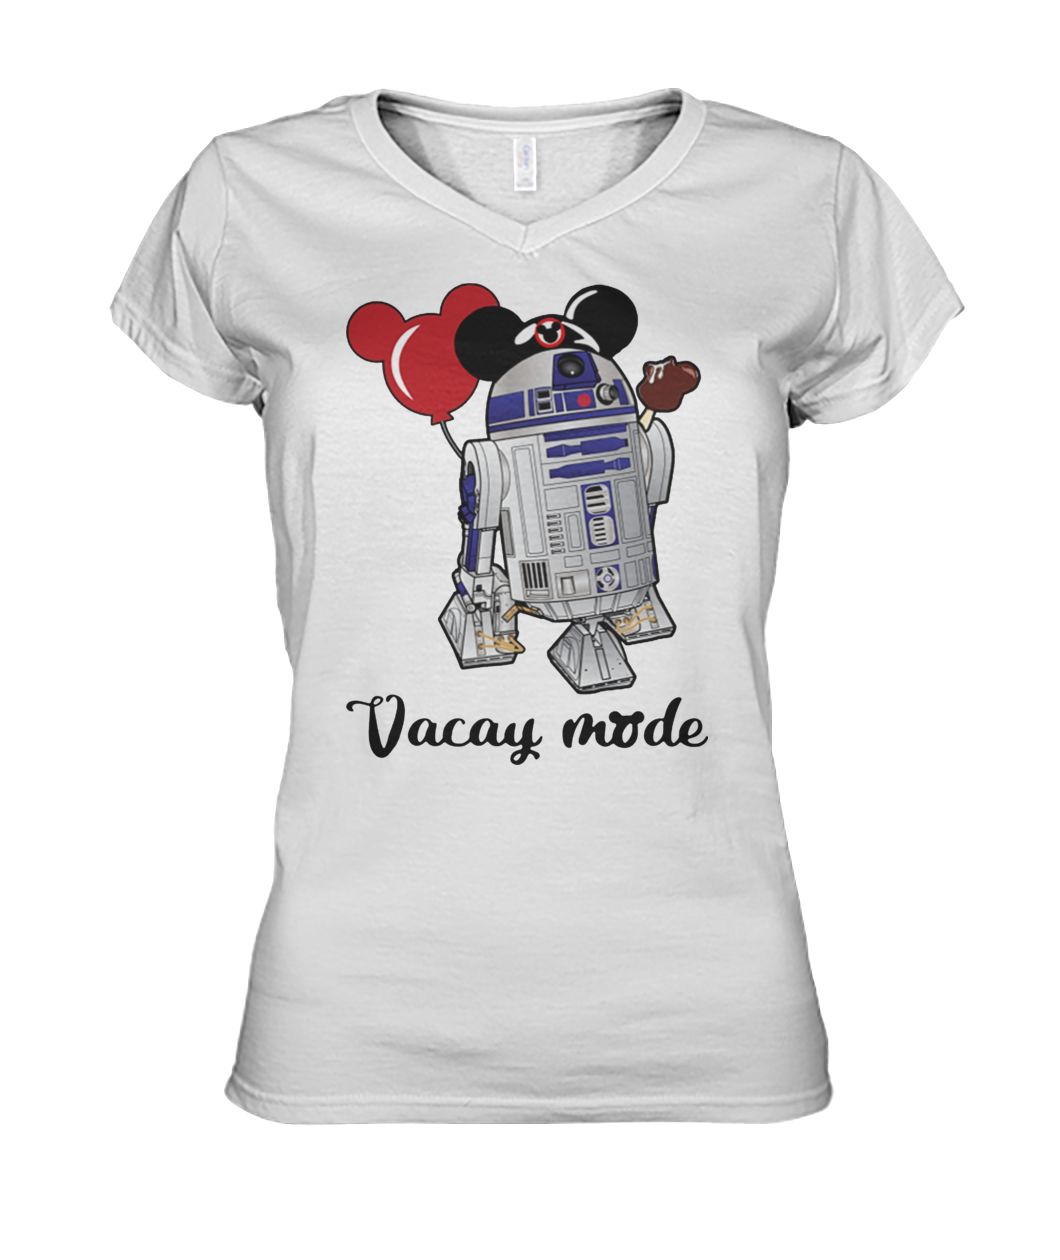 Star Wars R2-D2 vacay mode balloon mickey mouse women's v-neck